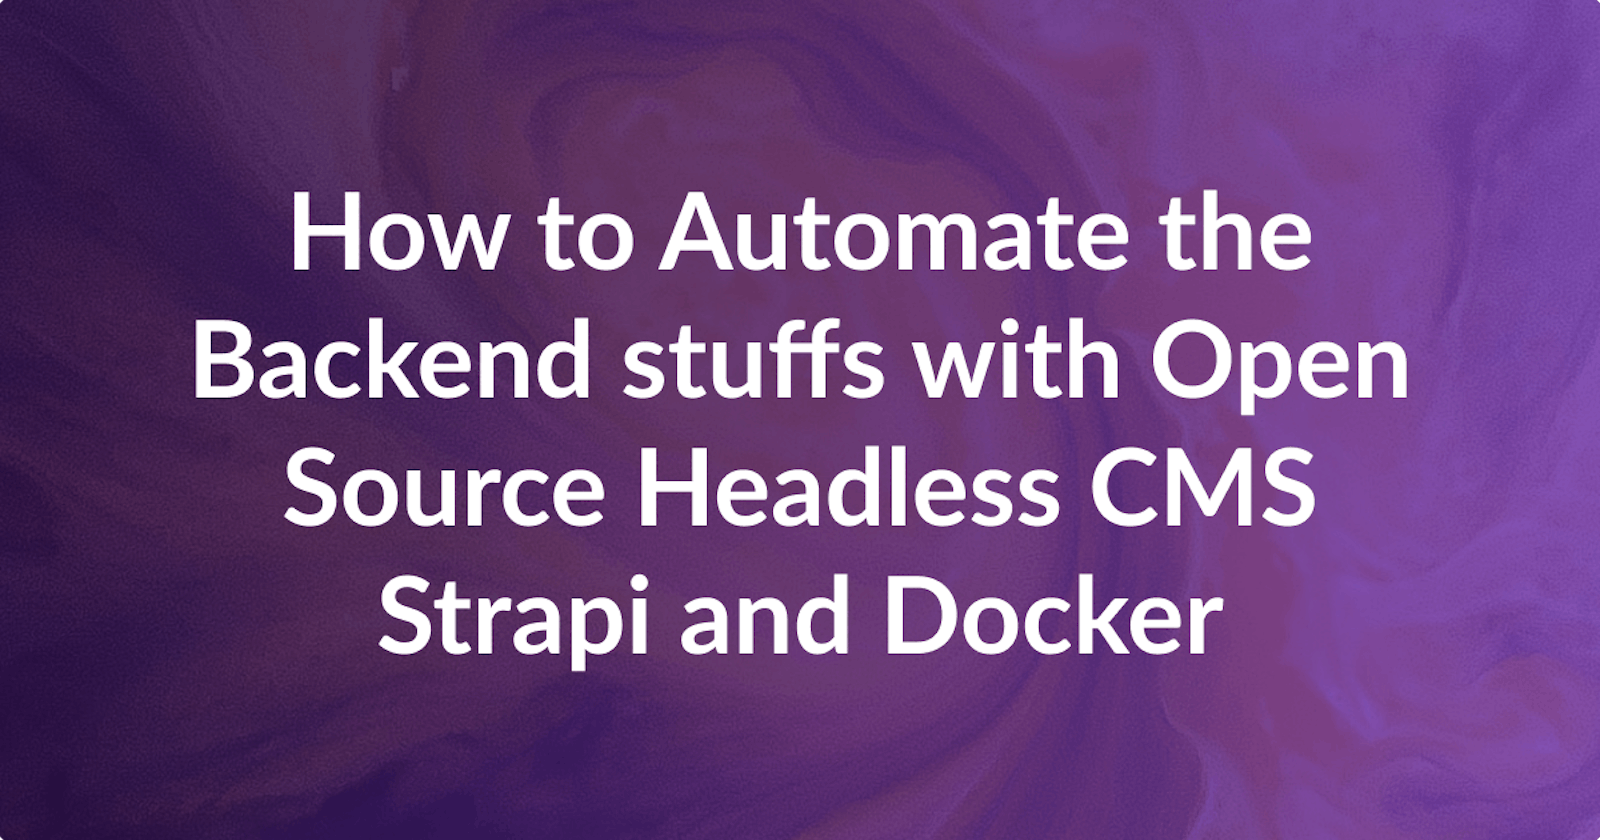 How to Automate the Backend stuffs with Open Source Headless CMS Strapi and Docker